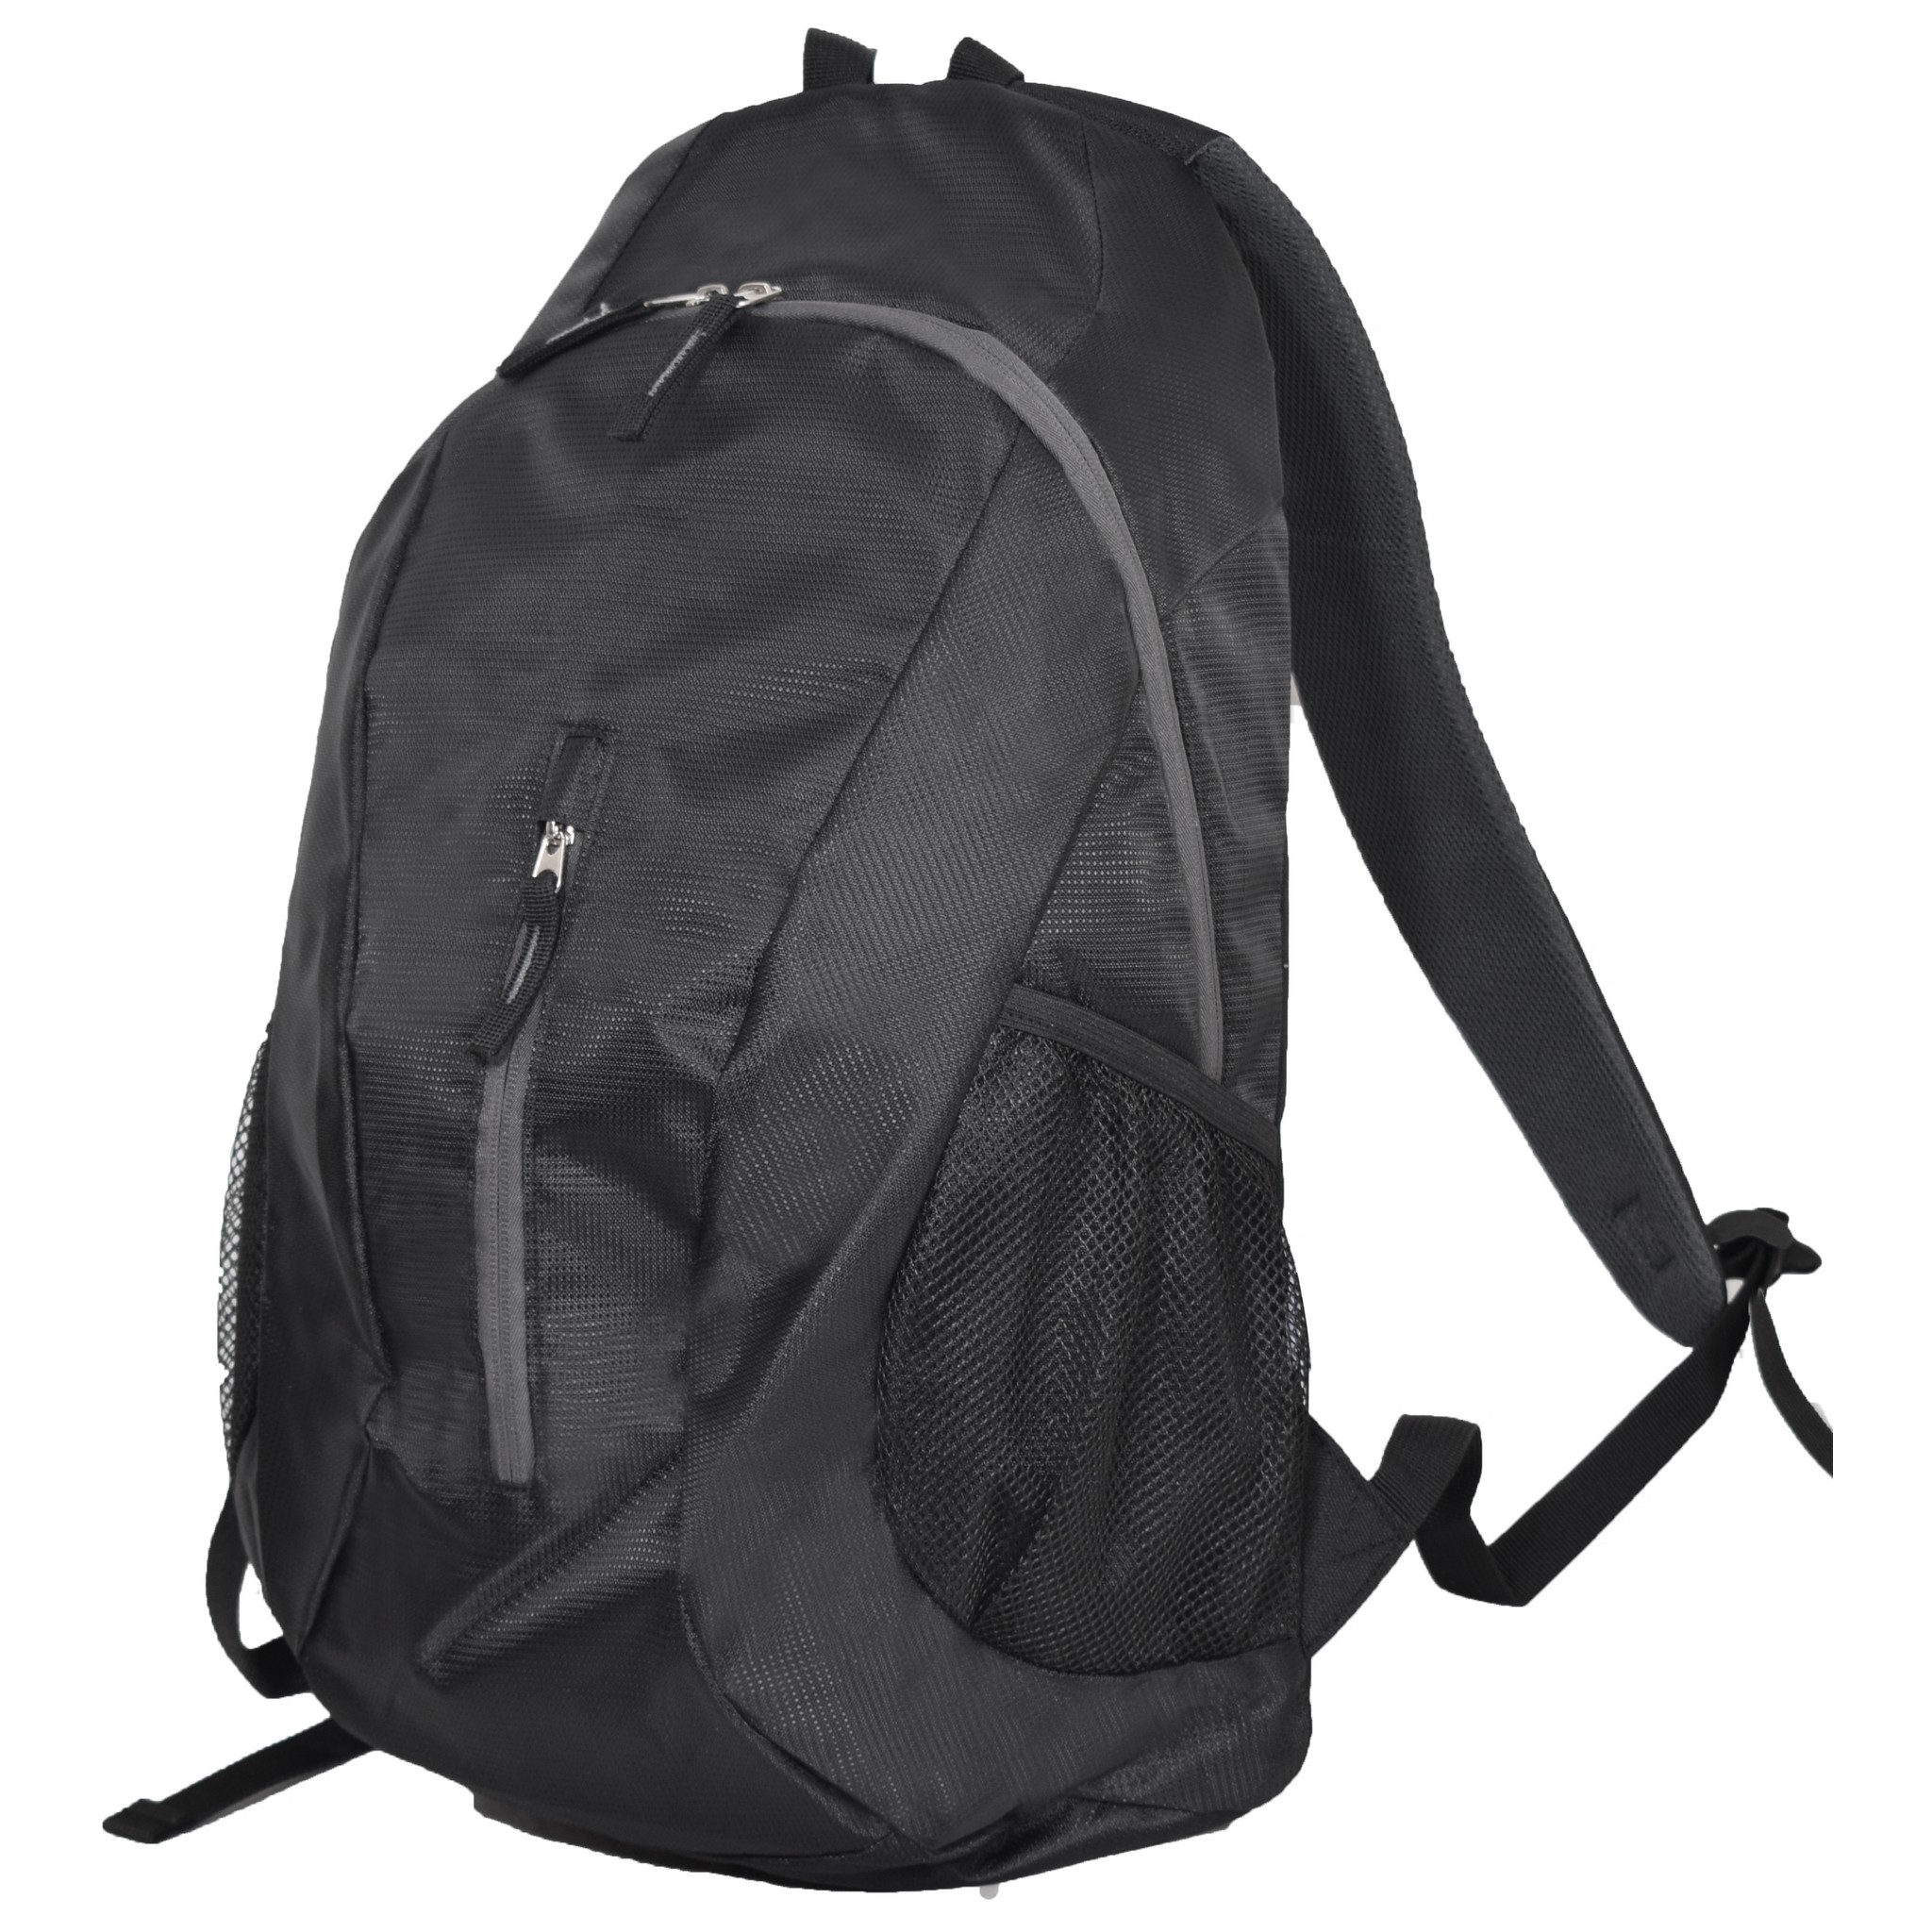 Hikers Backpack - Avail in Black or Blue